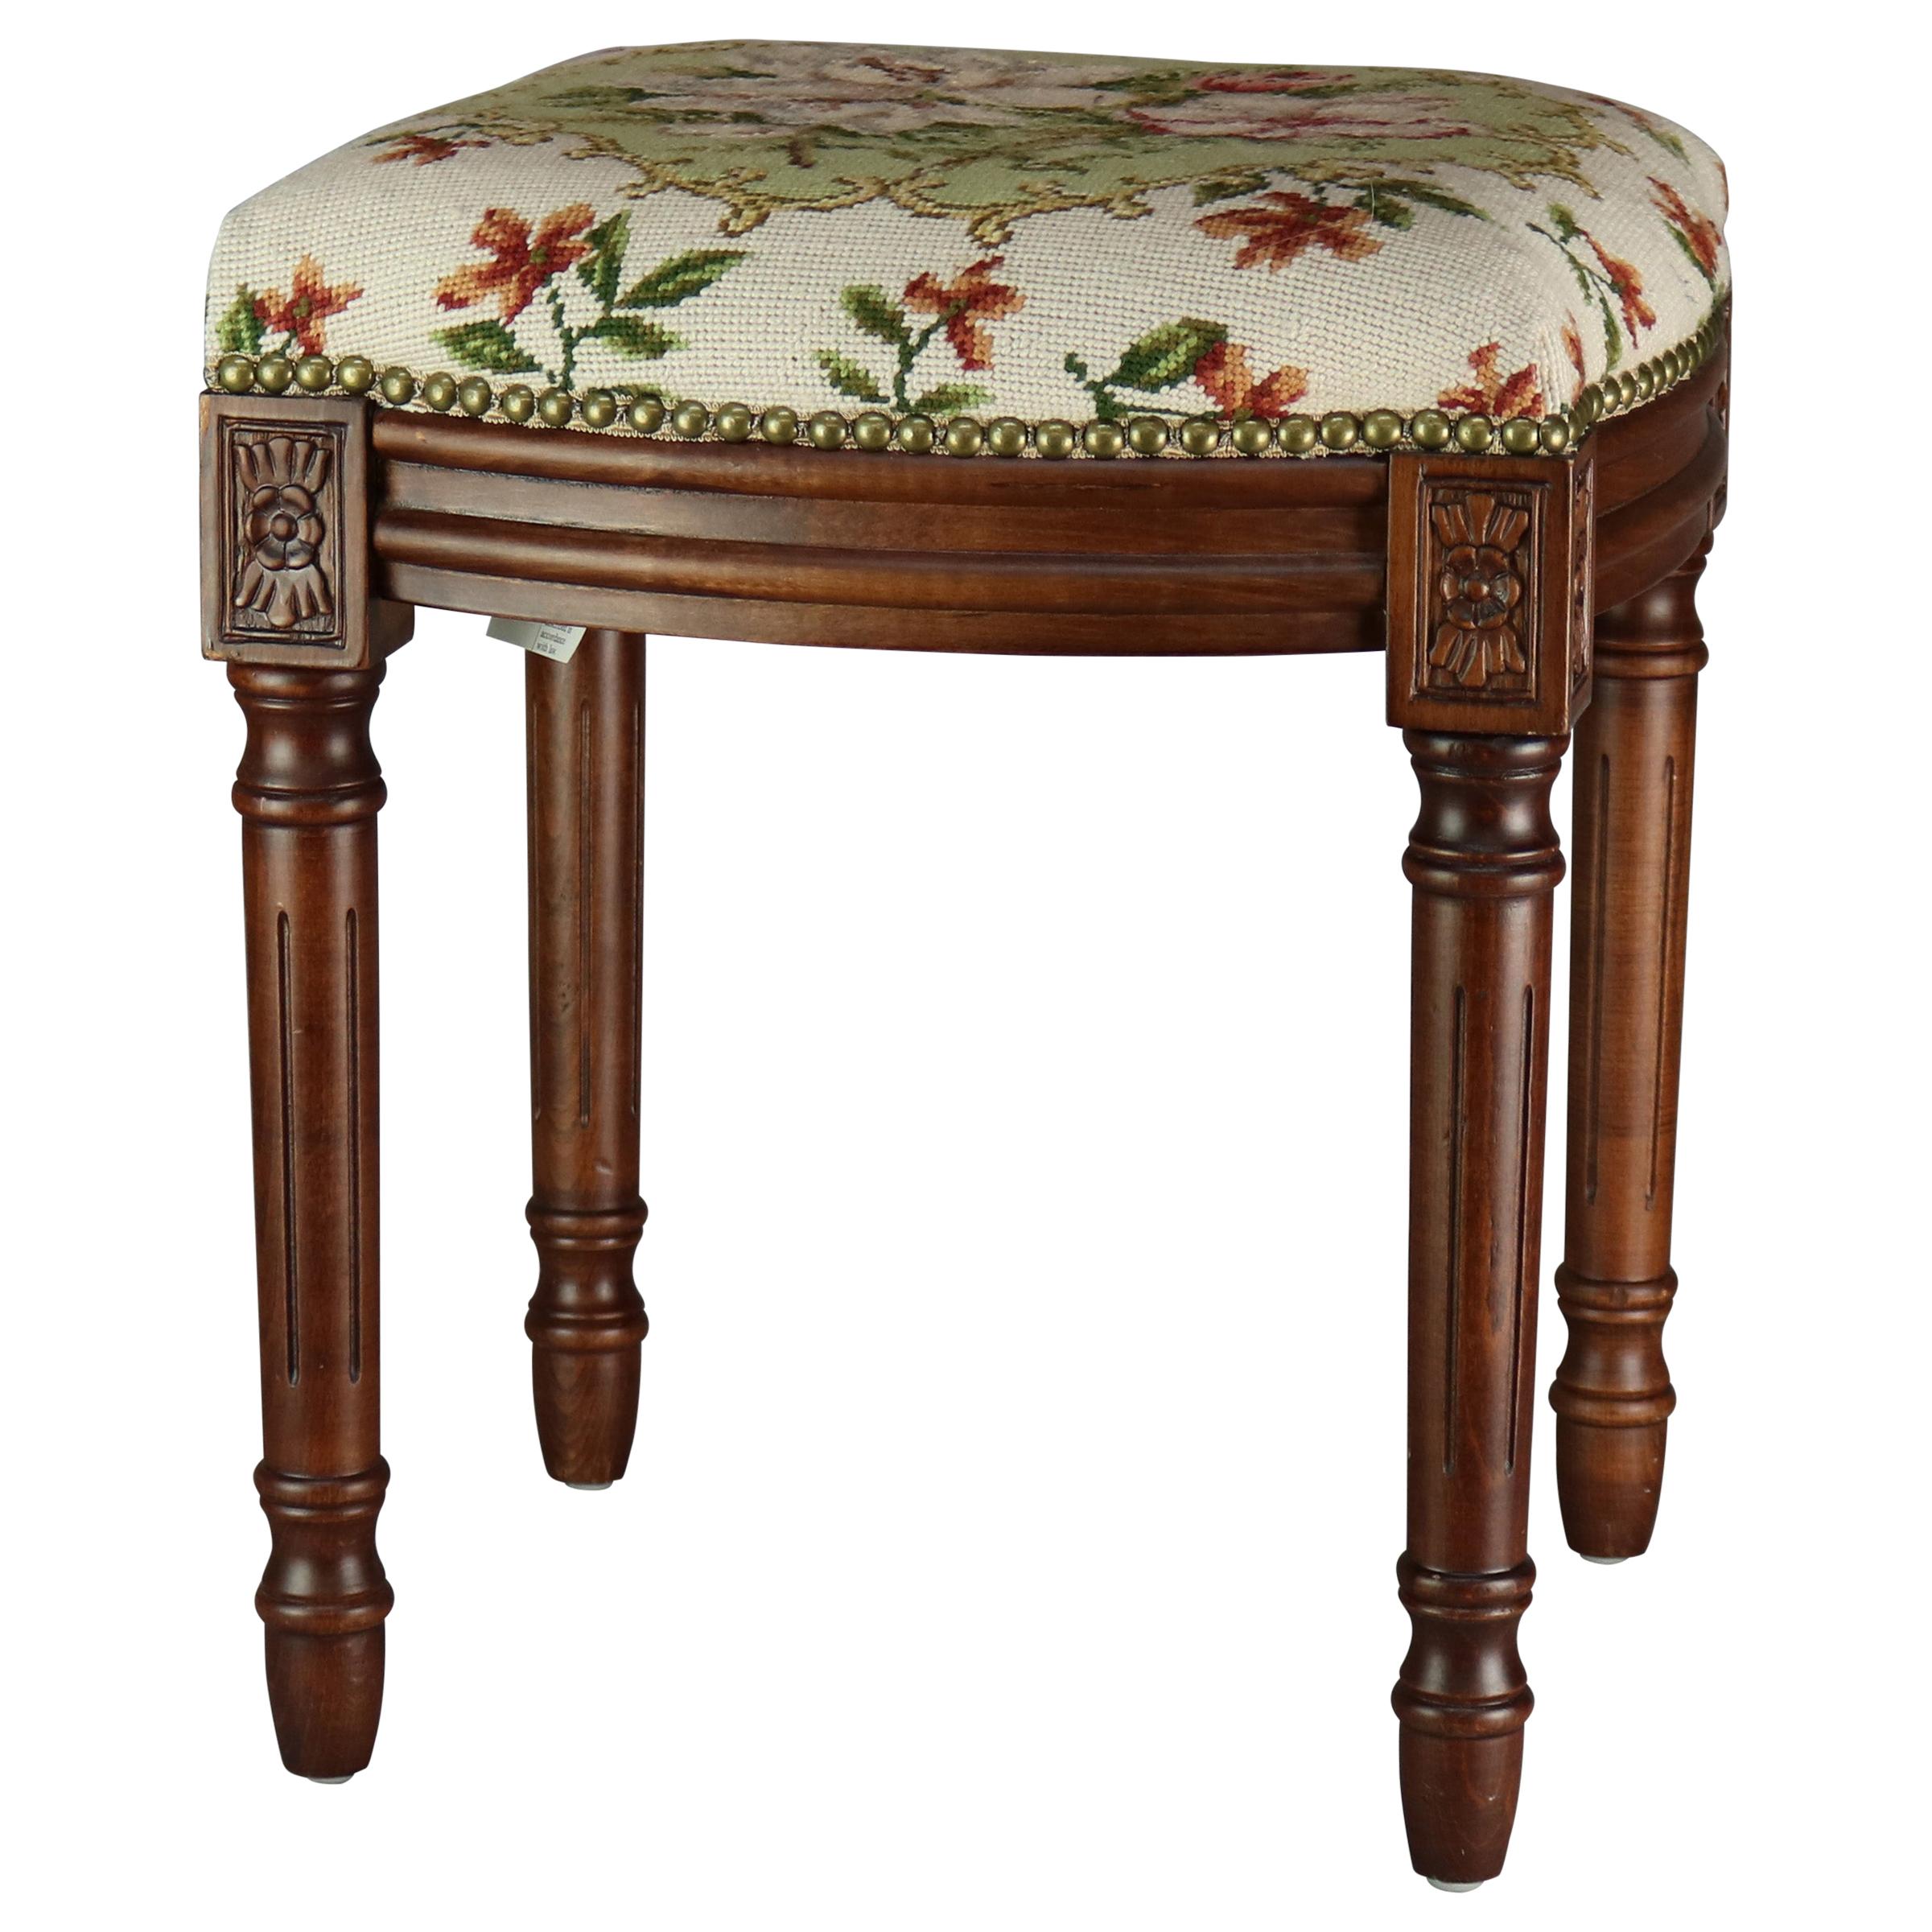 Antique French Louis XVI Mahogany Needlepoint Bench, 20th Century For Sale